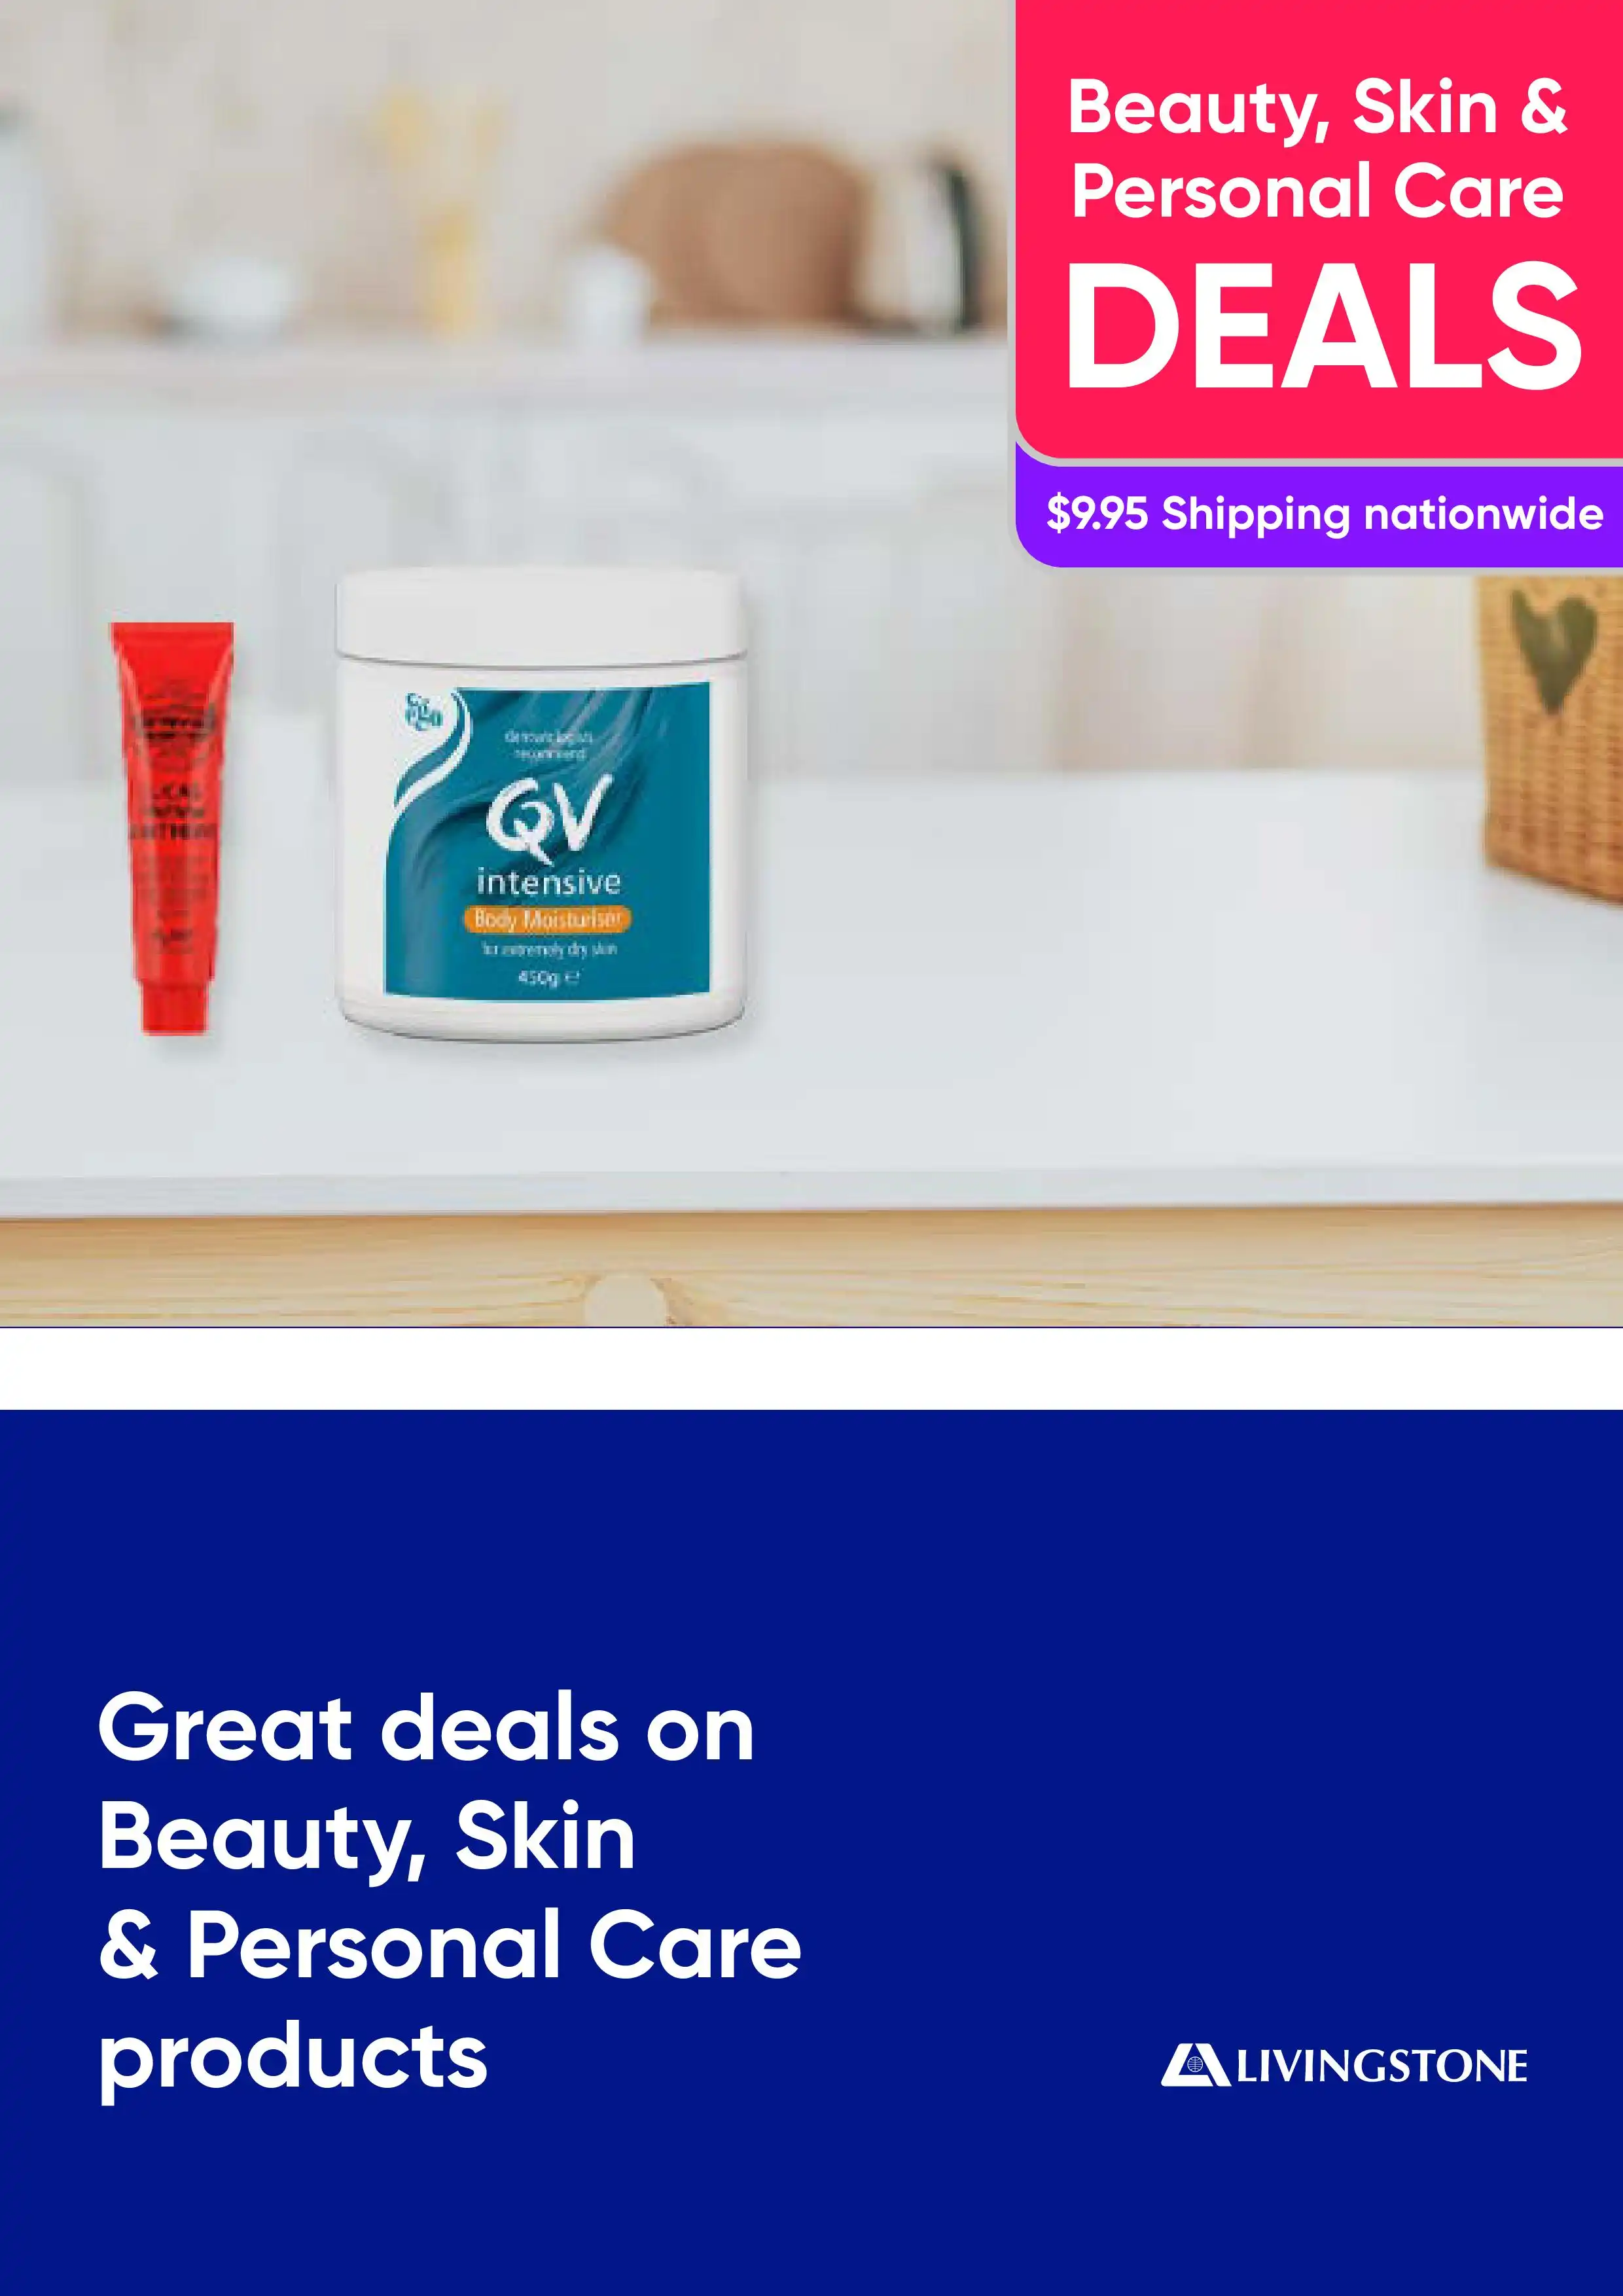 Great deals on Beauty, Skin & Personal Care products